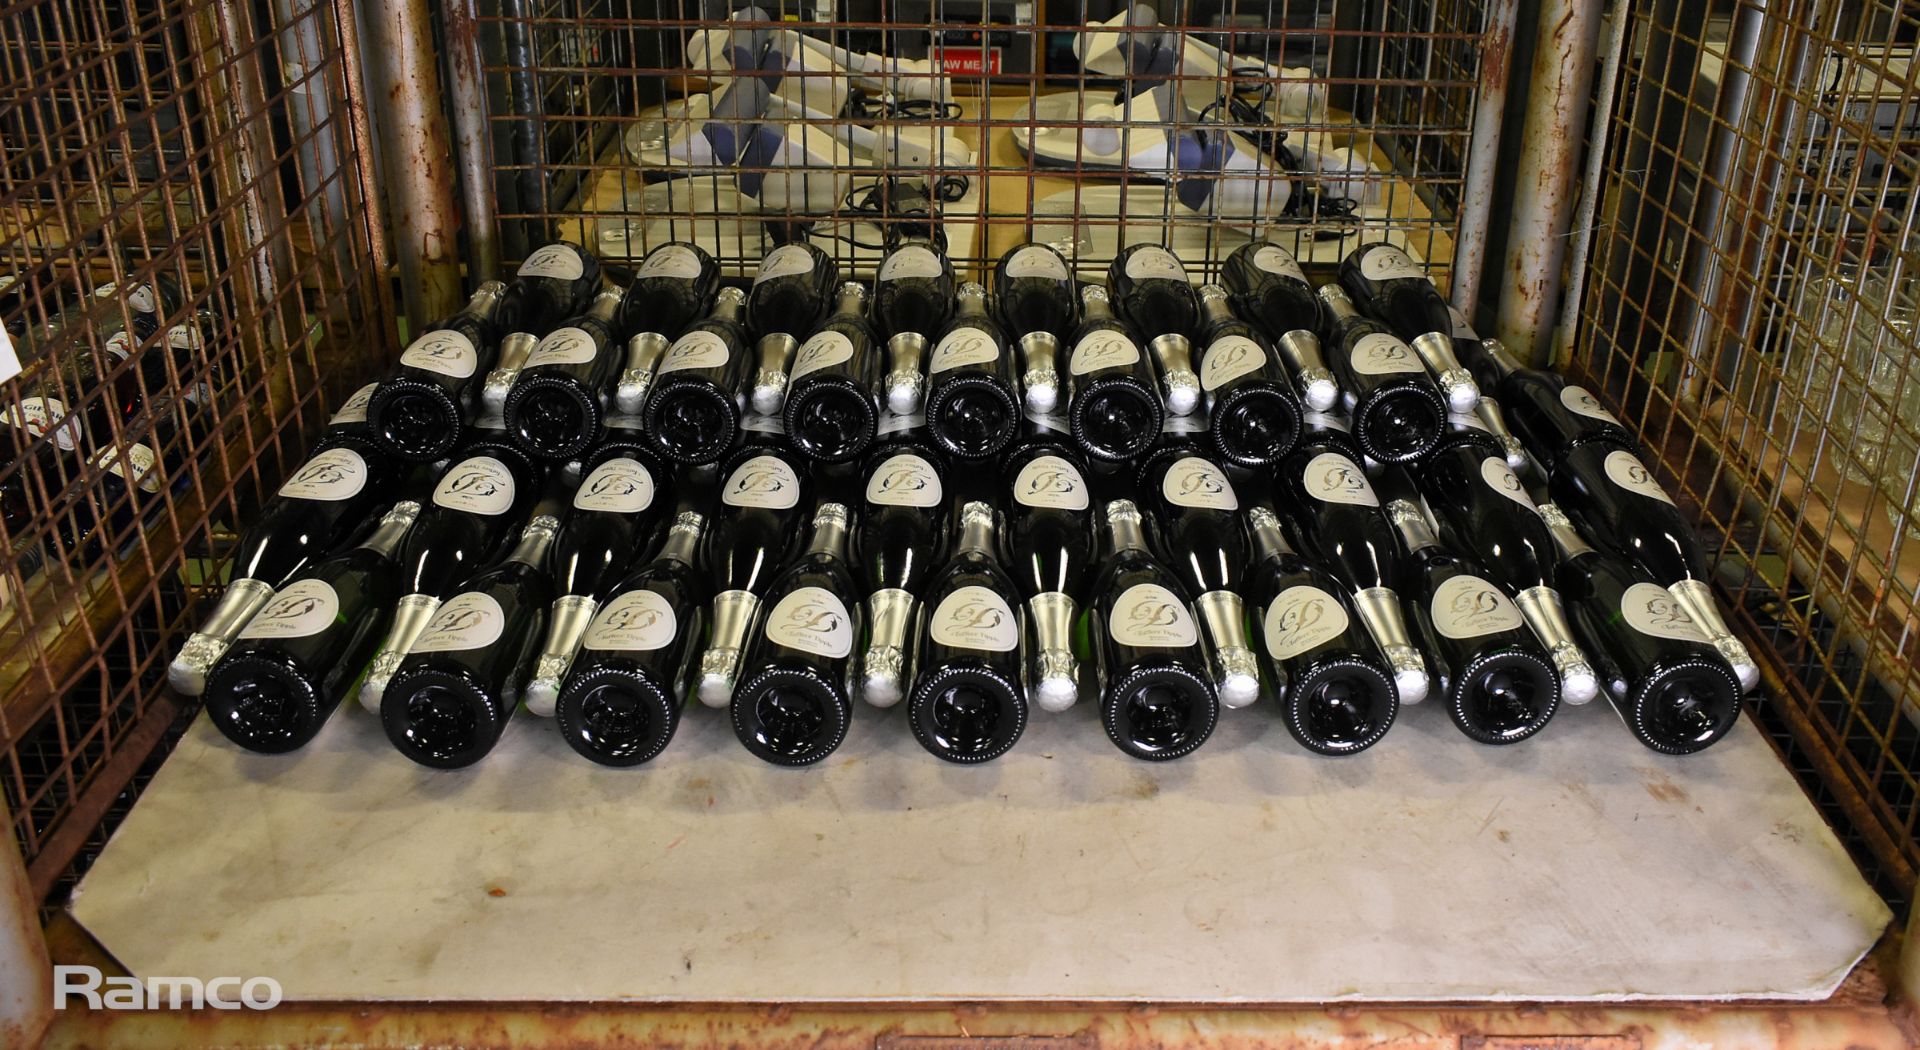 54x bottles of Tuffers Tipple The D Blanquette de Limoux sparkling wine - 75cl - Image 5 of 5